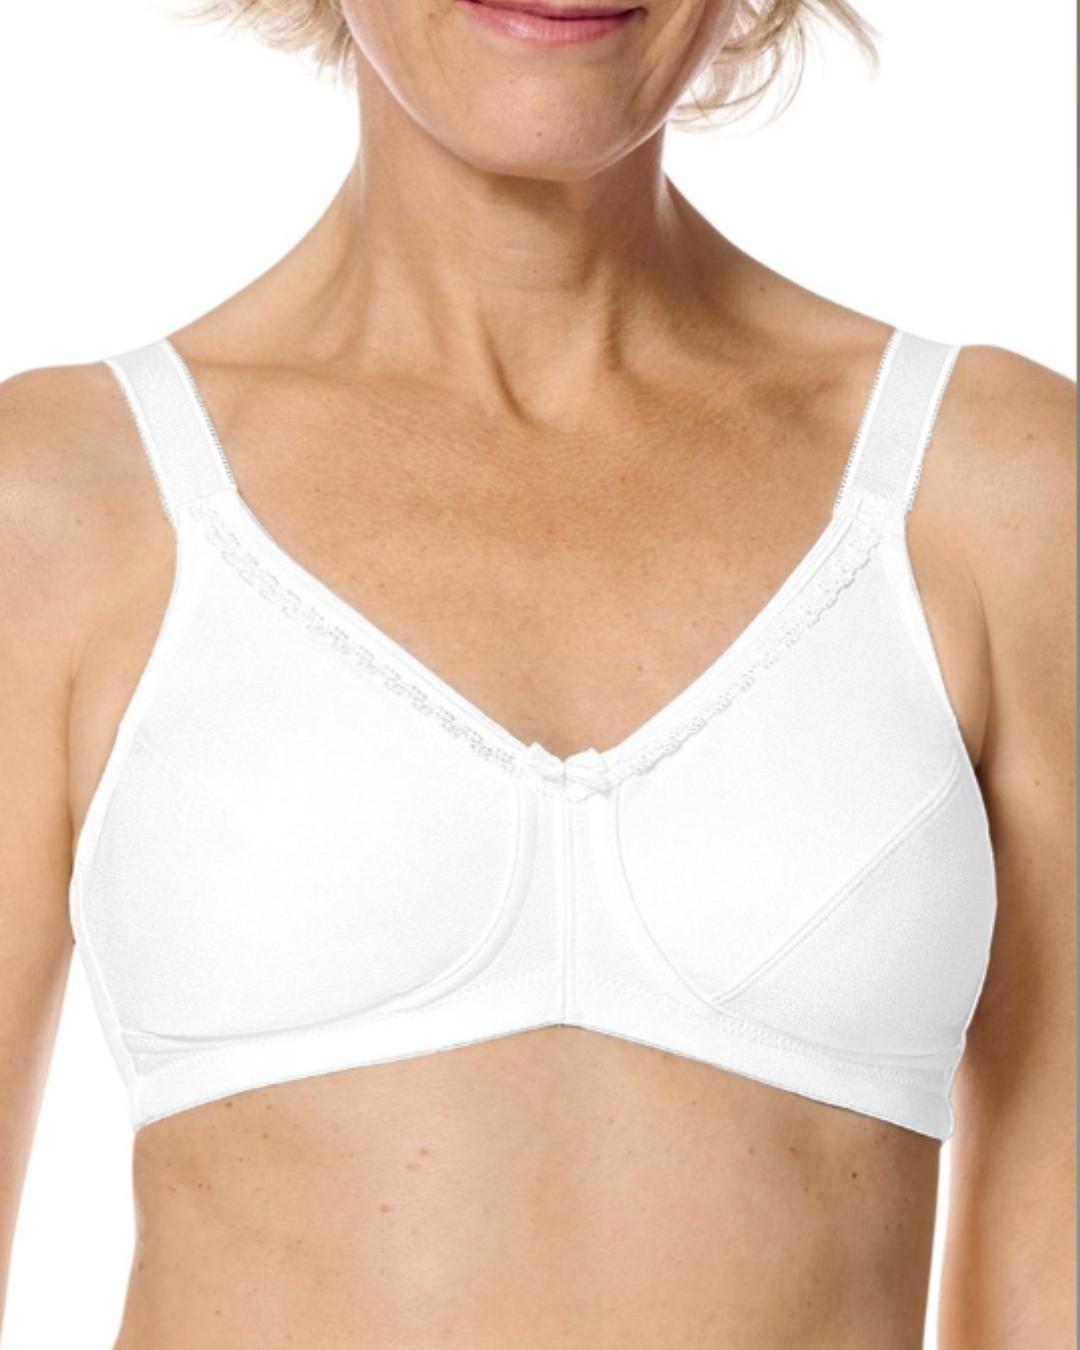 Amoena Rita Bra - Pocketed, non-wired bra offering firm control and support for post-breast surgery.